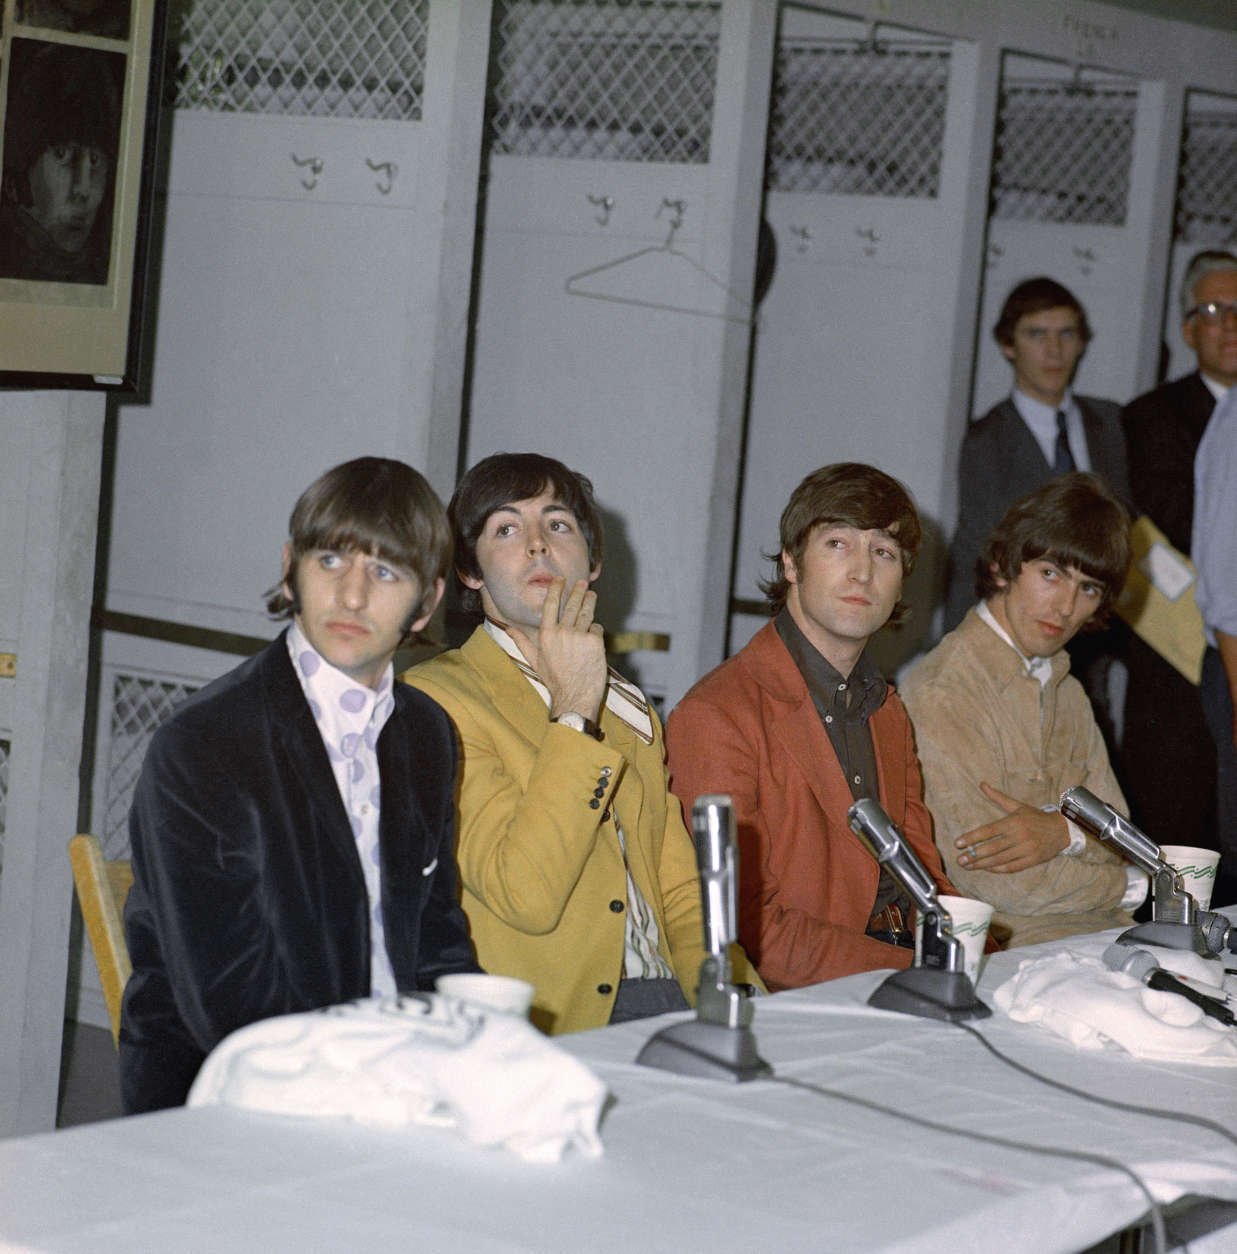 The British rock group the Beatles is shown during their U.S. tour in Washington, D.C., Aug. 13, 1966. From left to right are Ringo Starr, Paul McCartney, John Lennon, and George Harrison.  (AP Photo)